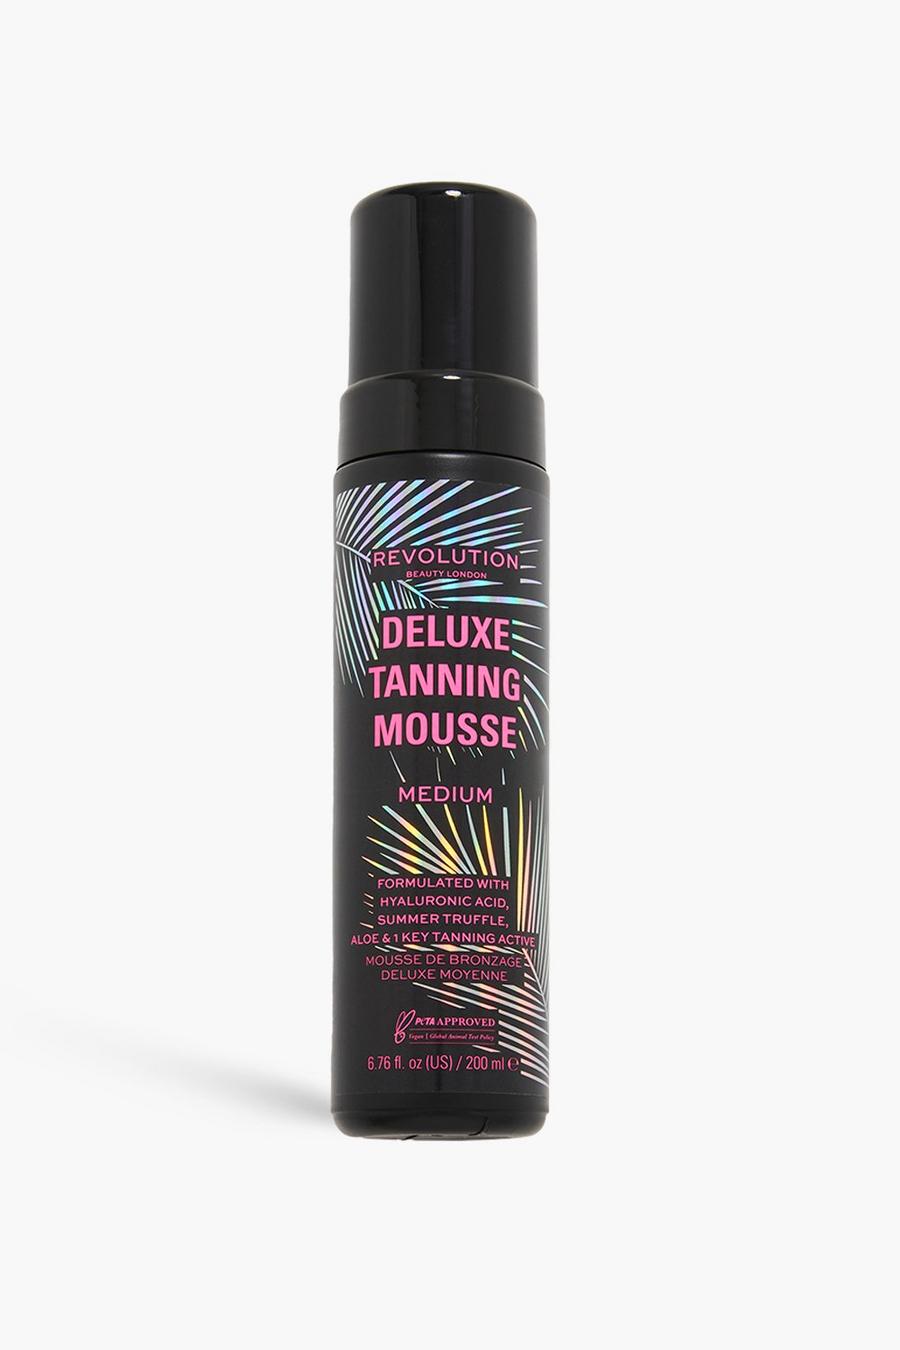 Clear Revolution Beauty Deluxe Tanning Mousse Medium